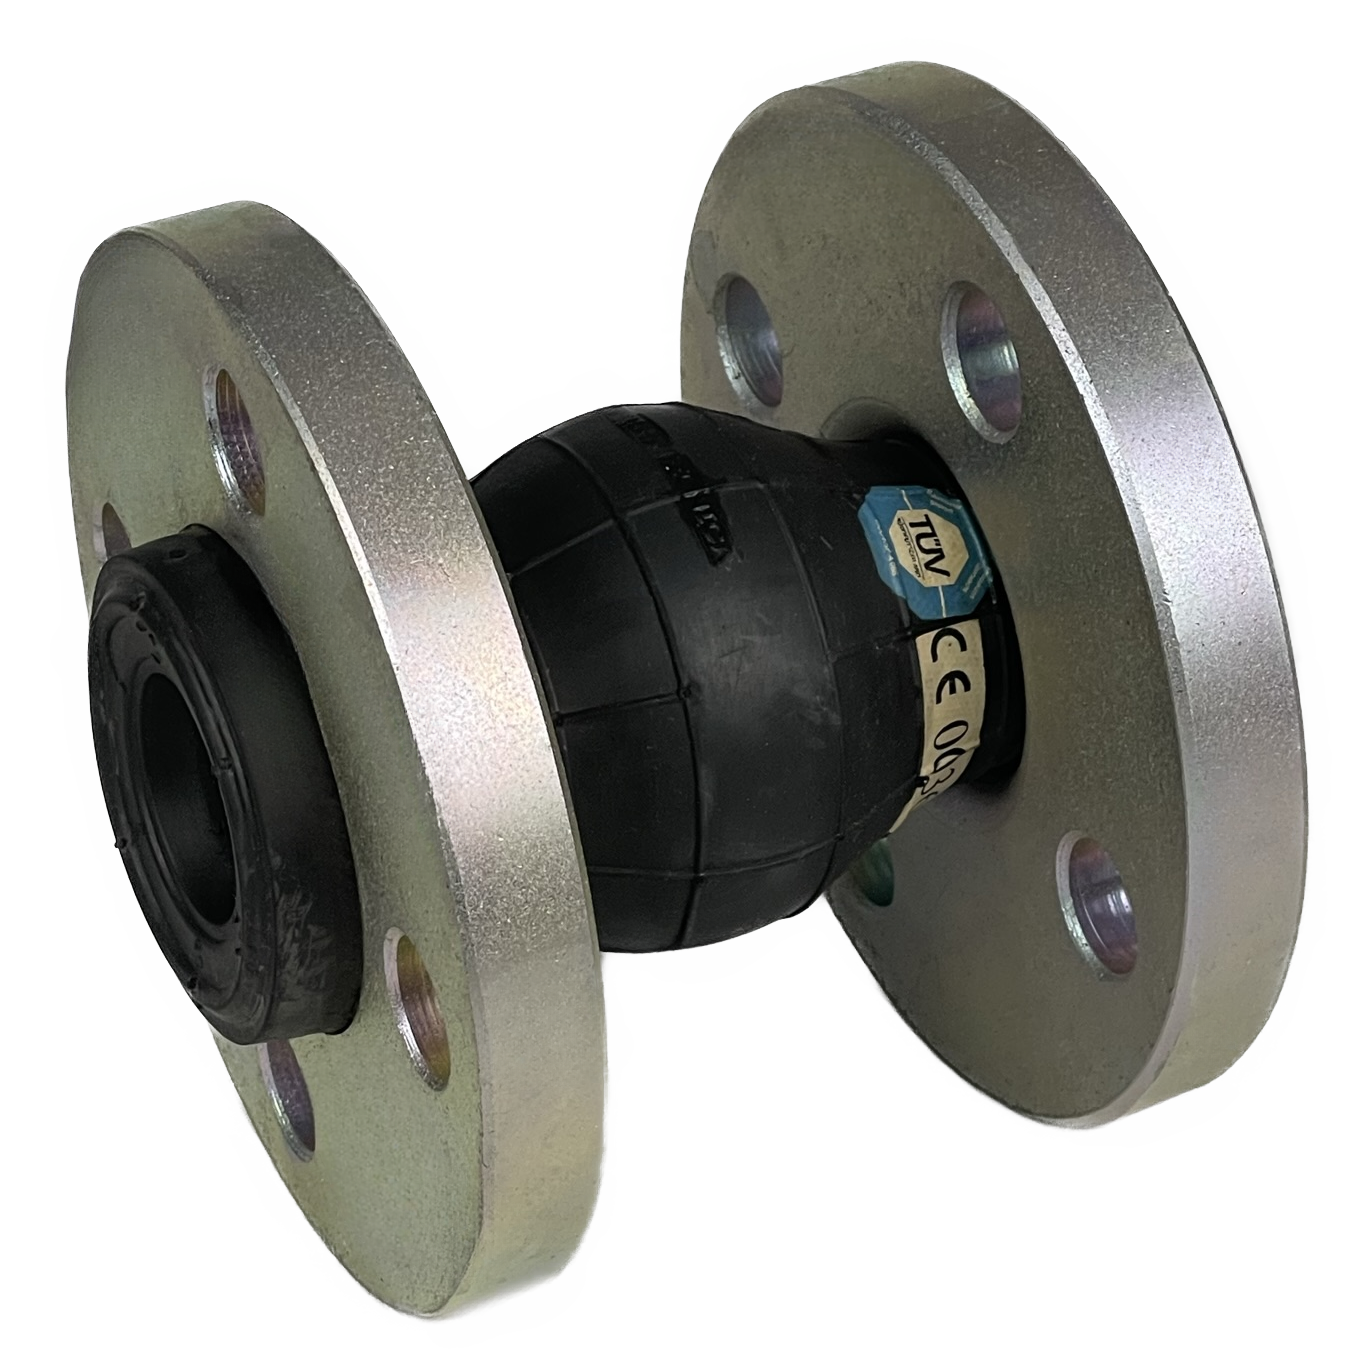 Rubber Expansion Joints with loose flanges - Typ BOA 3140 00S-A-EPDMT